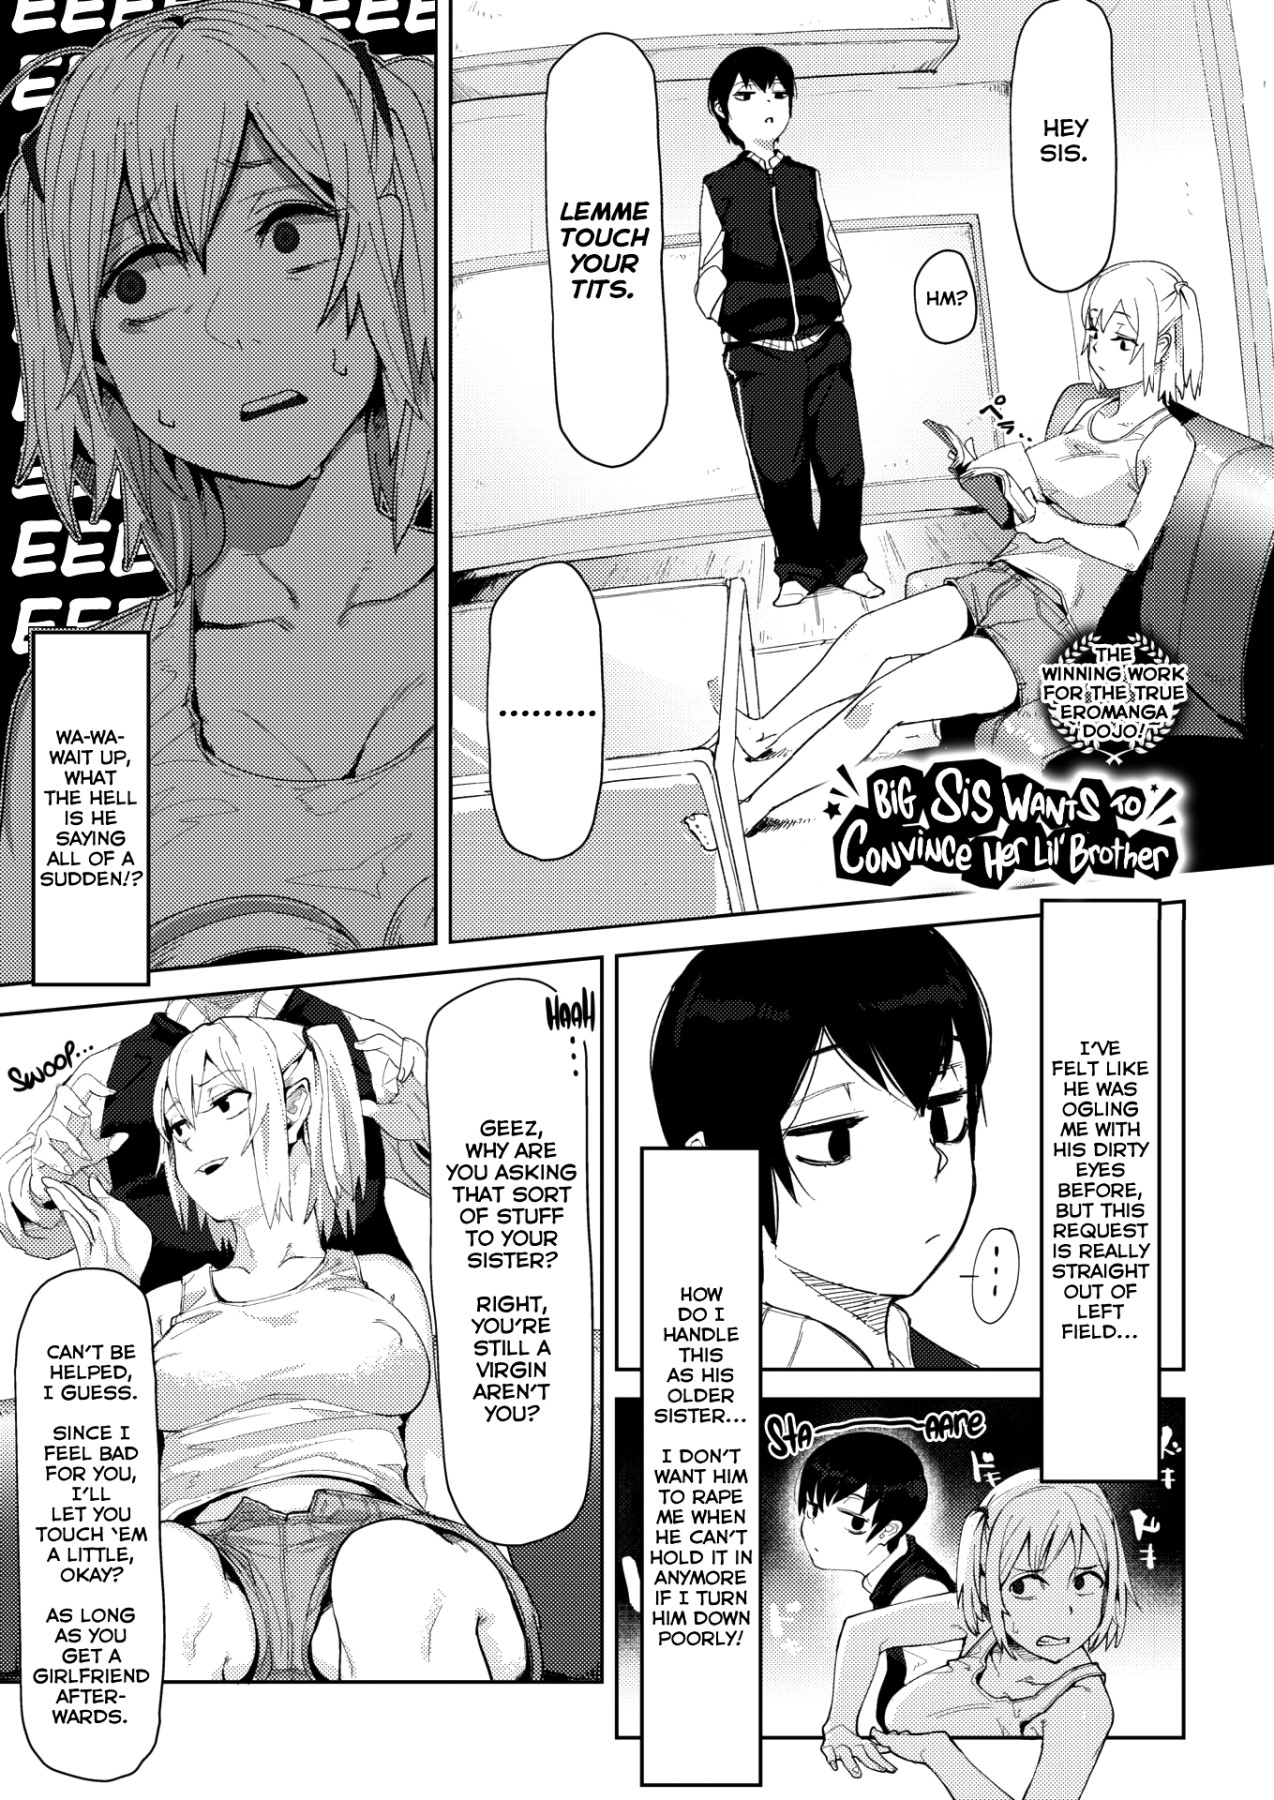 Hentai Manga Comic-Big Sis Wants to Convince Her Lil' Brother-Read-1